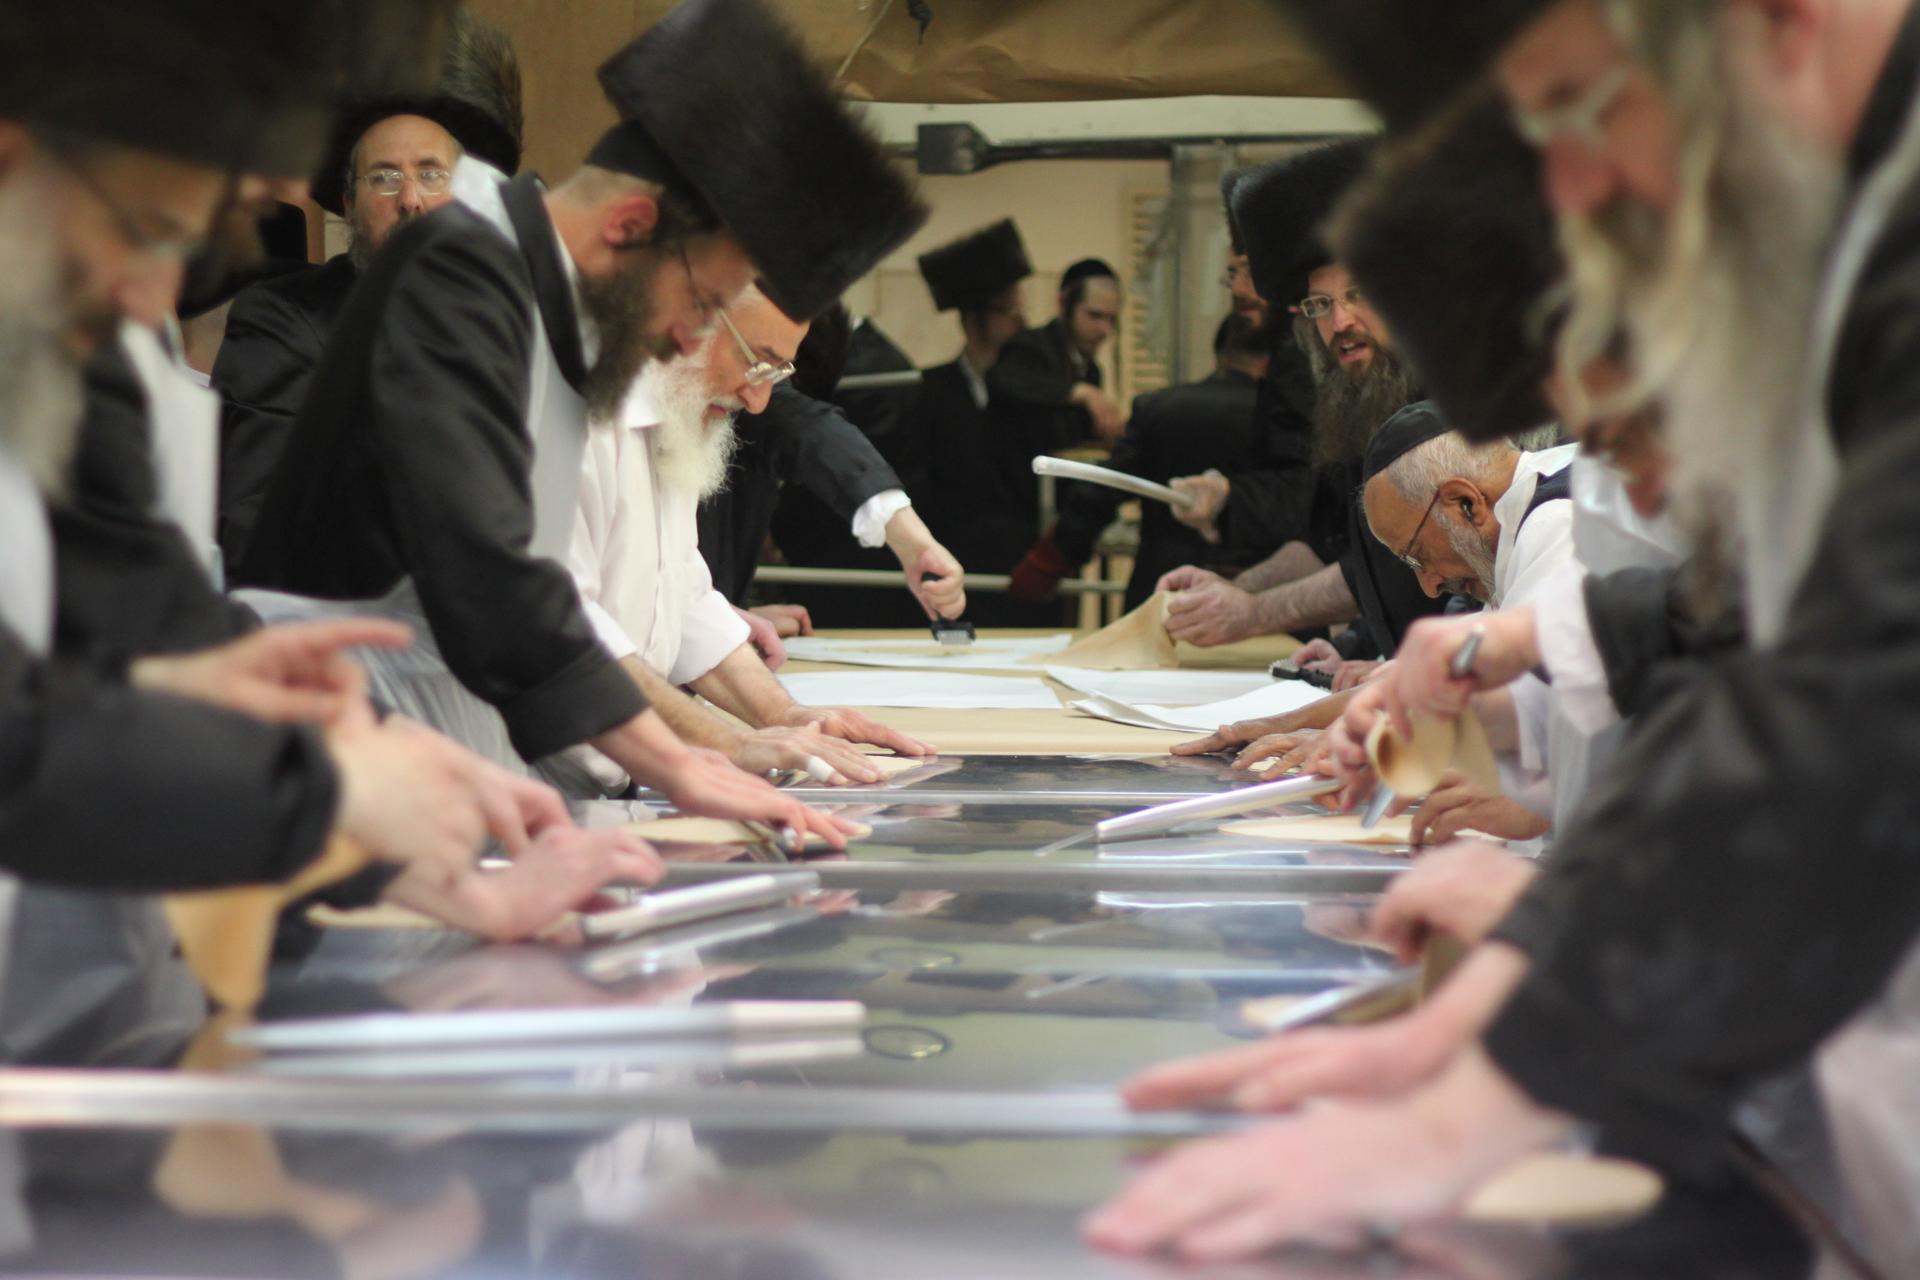 Men lined up in a human assembly line, preparing matzah at the Belz synagogue in Jerusalem.